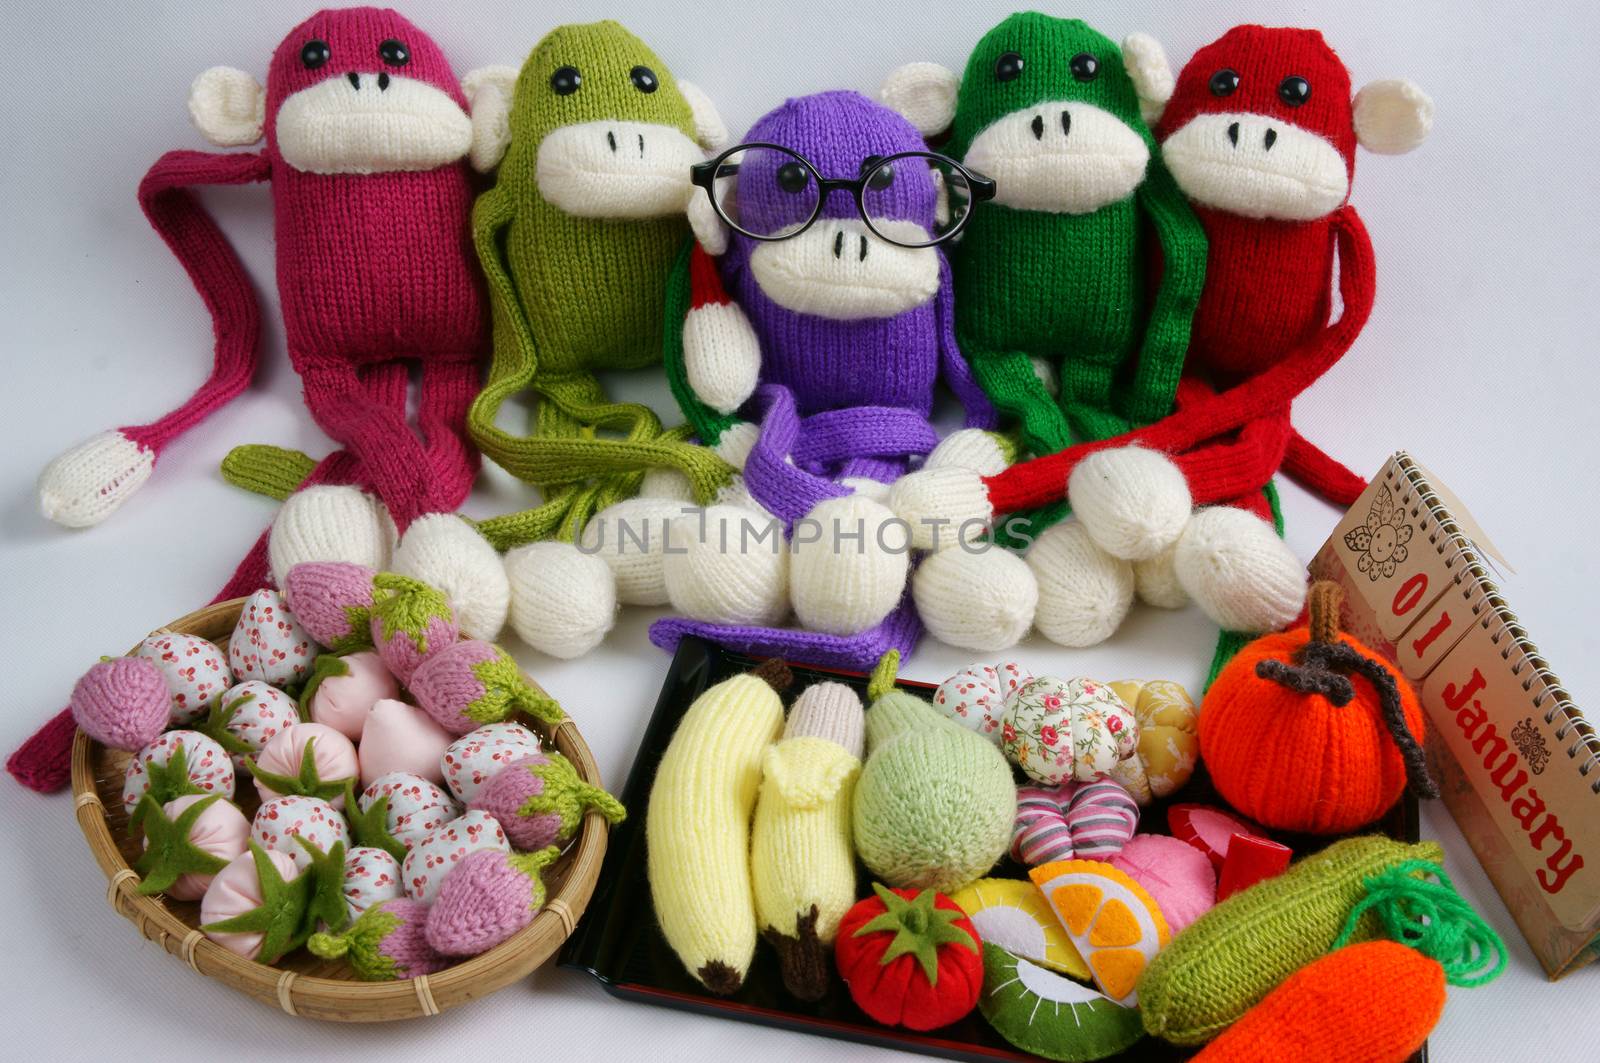 Family of stuffed animal sit at new year party, group of knitted monkey in colorful yarn, symbol of 2016, funny homemade toy on white background, handmade food and calendar to happy new year